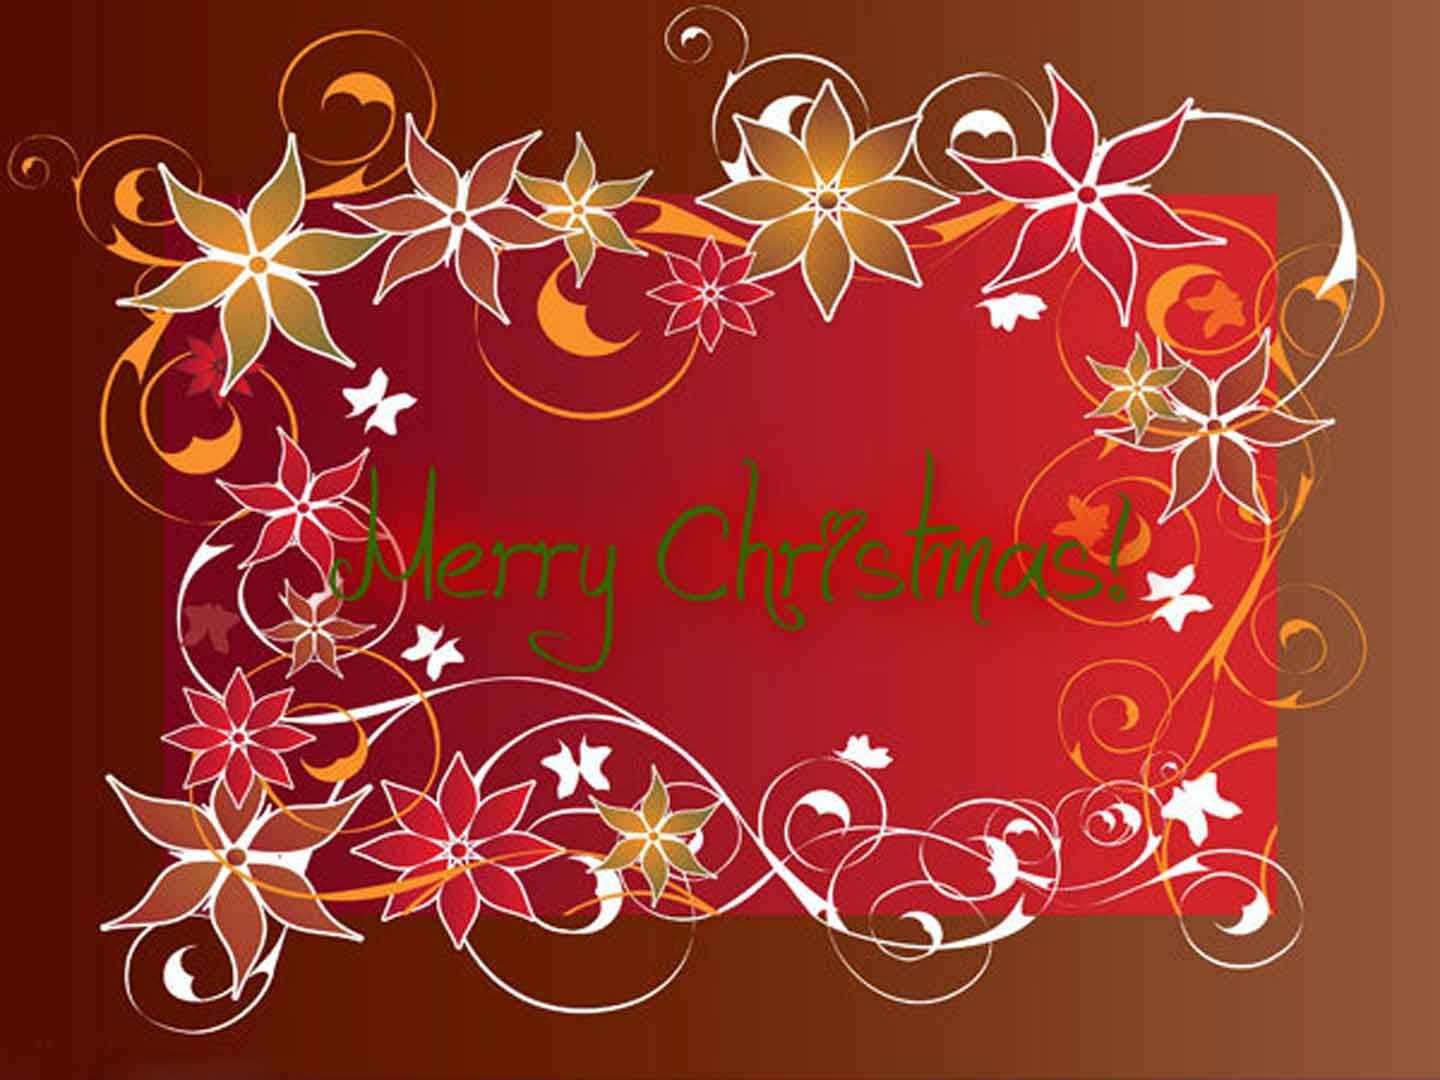 Merry Christmas Greeting Cards And